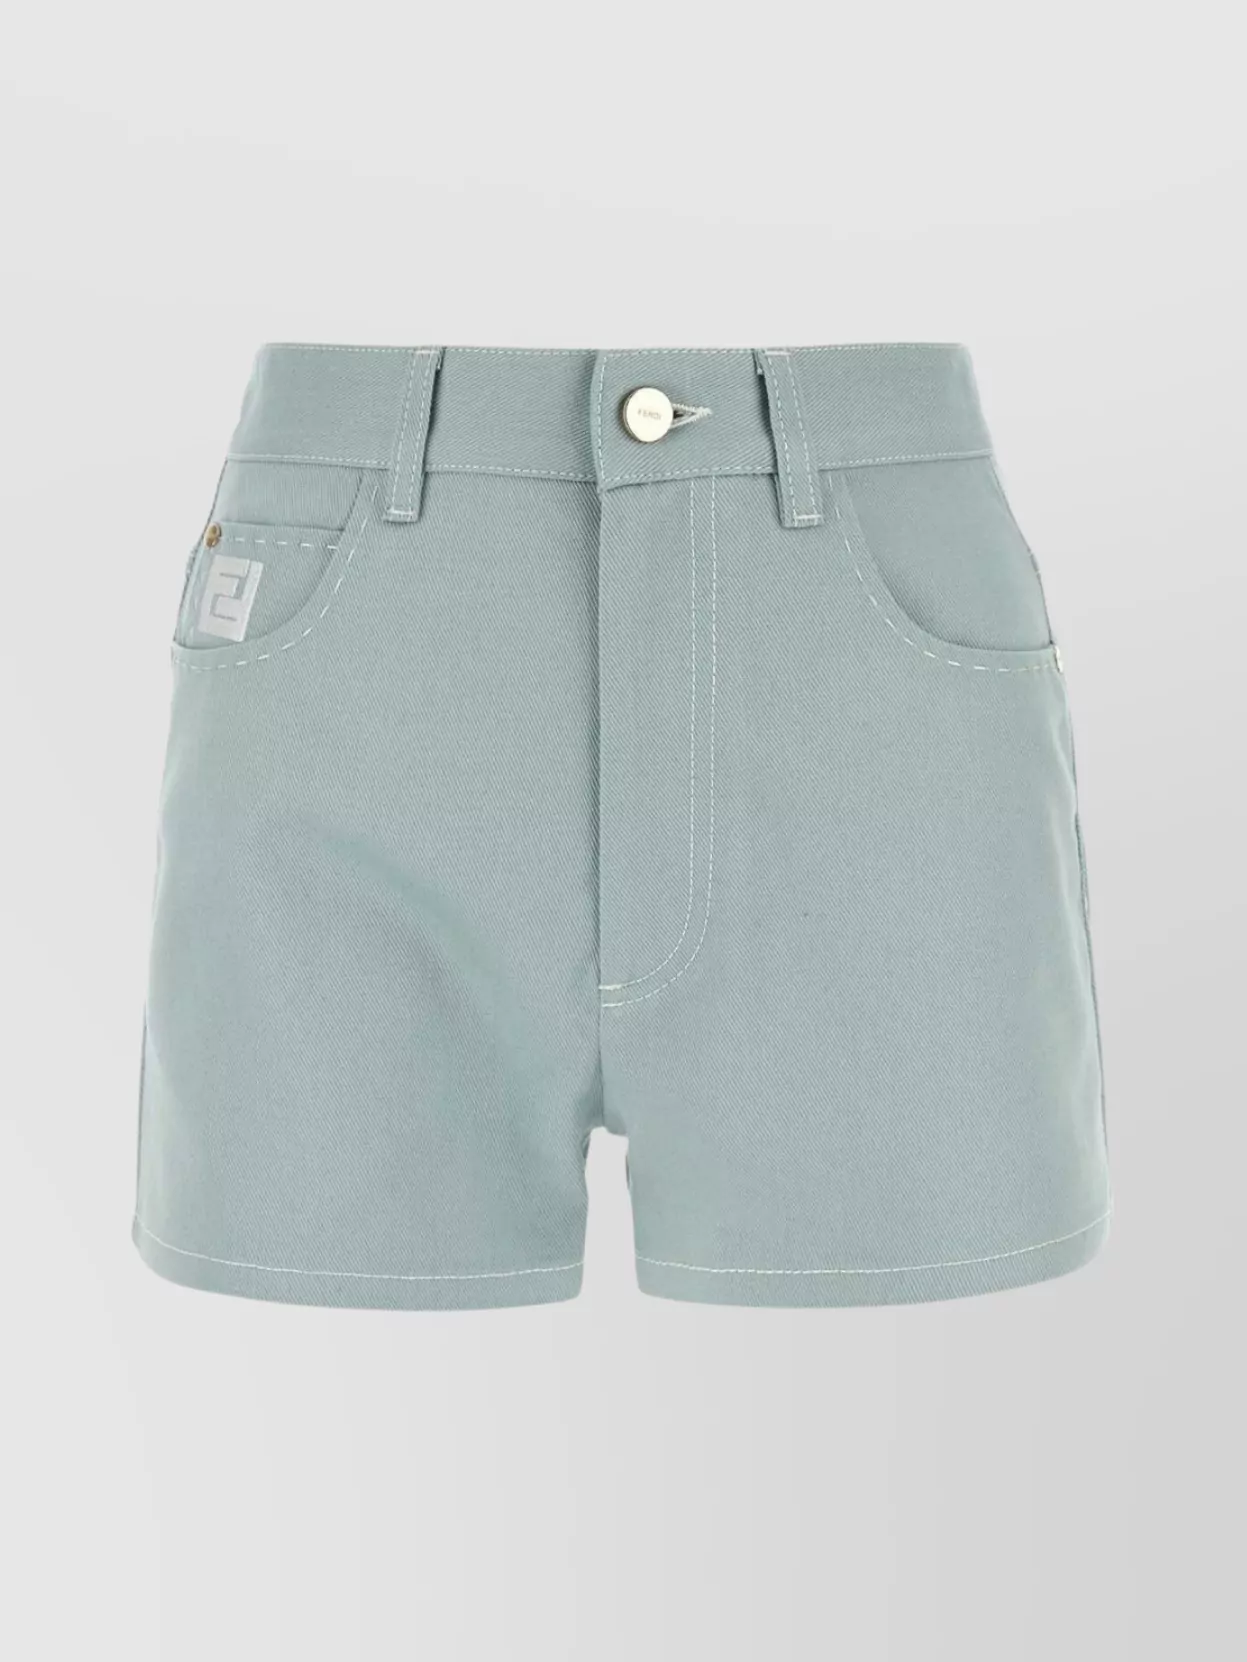 Shop Fendi Denim Shorts With Patch Pockets And Belt Loops